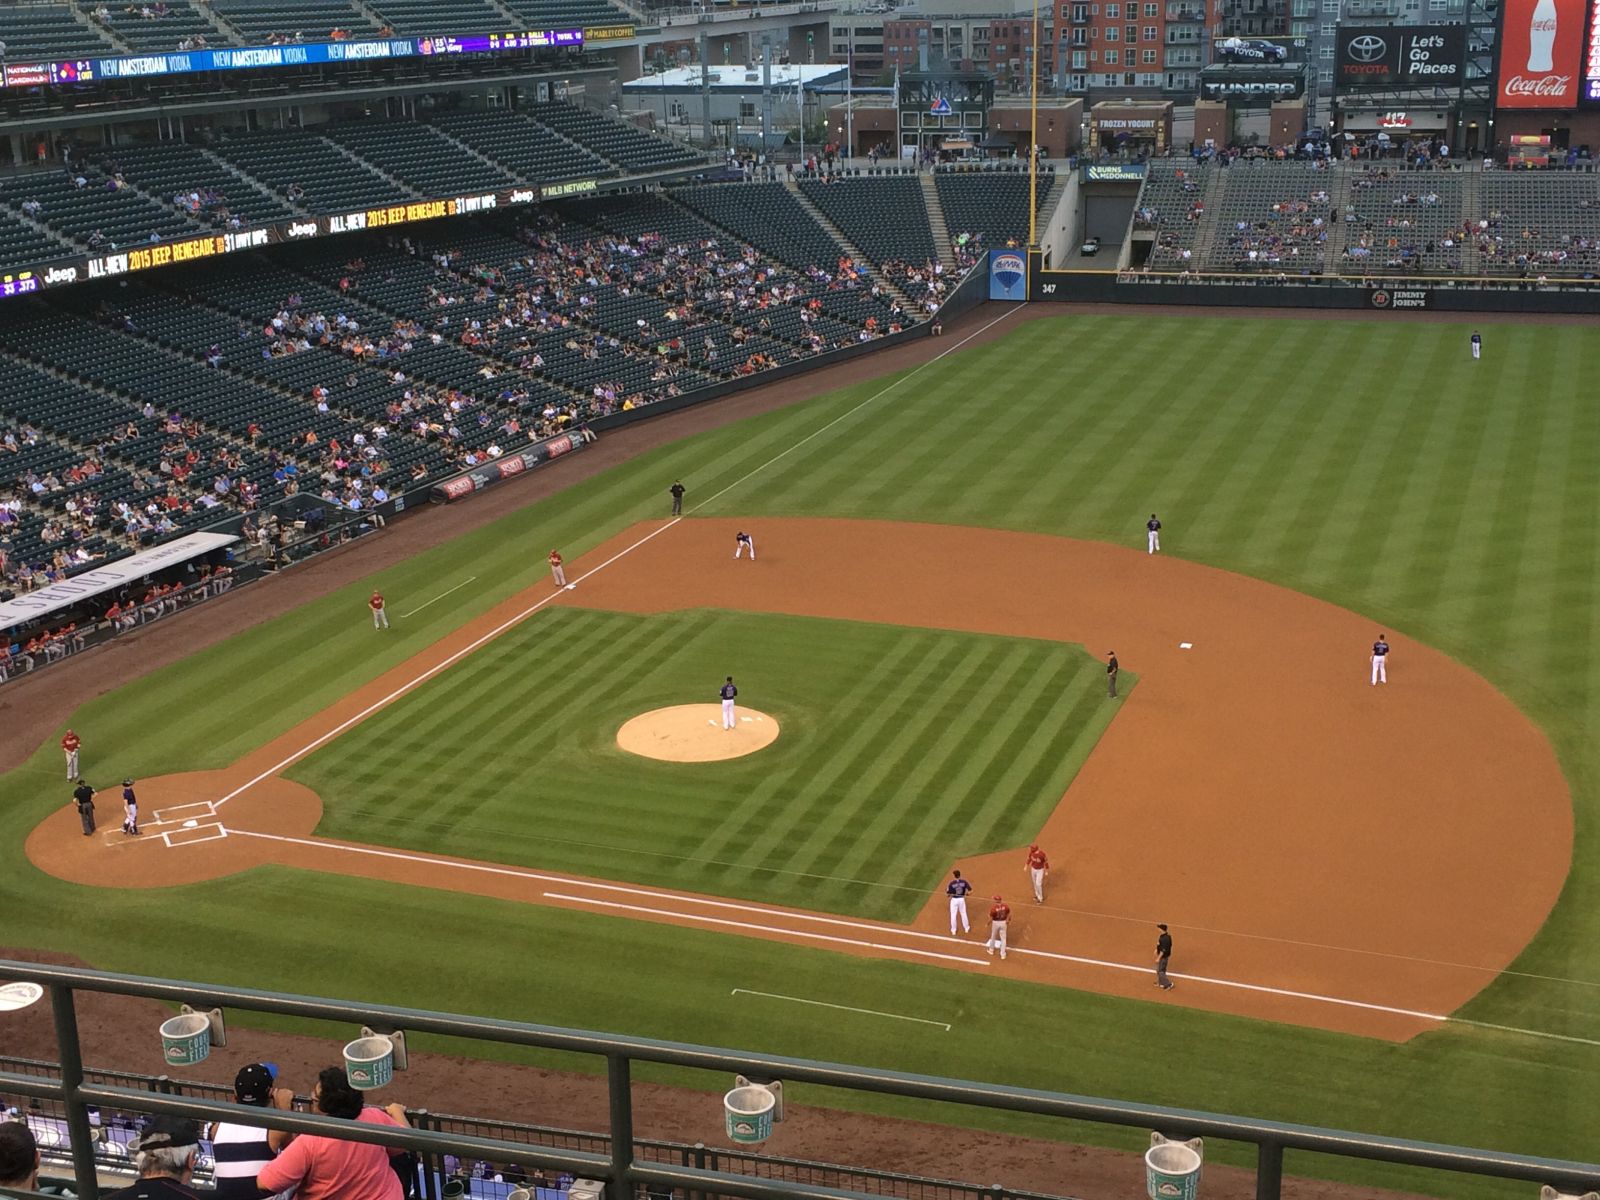 section 321, row 10 seat view  - coors field